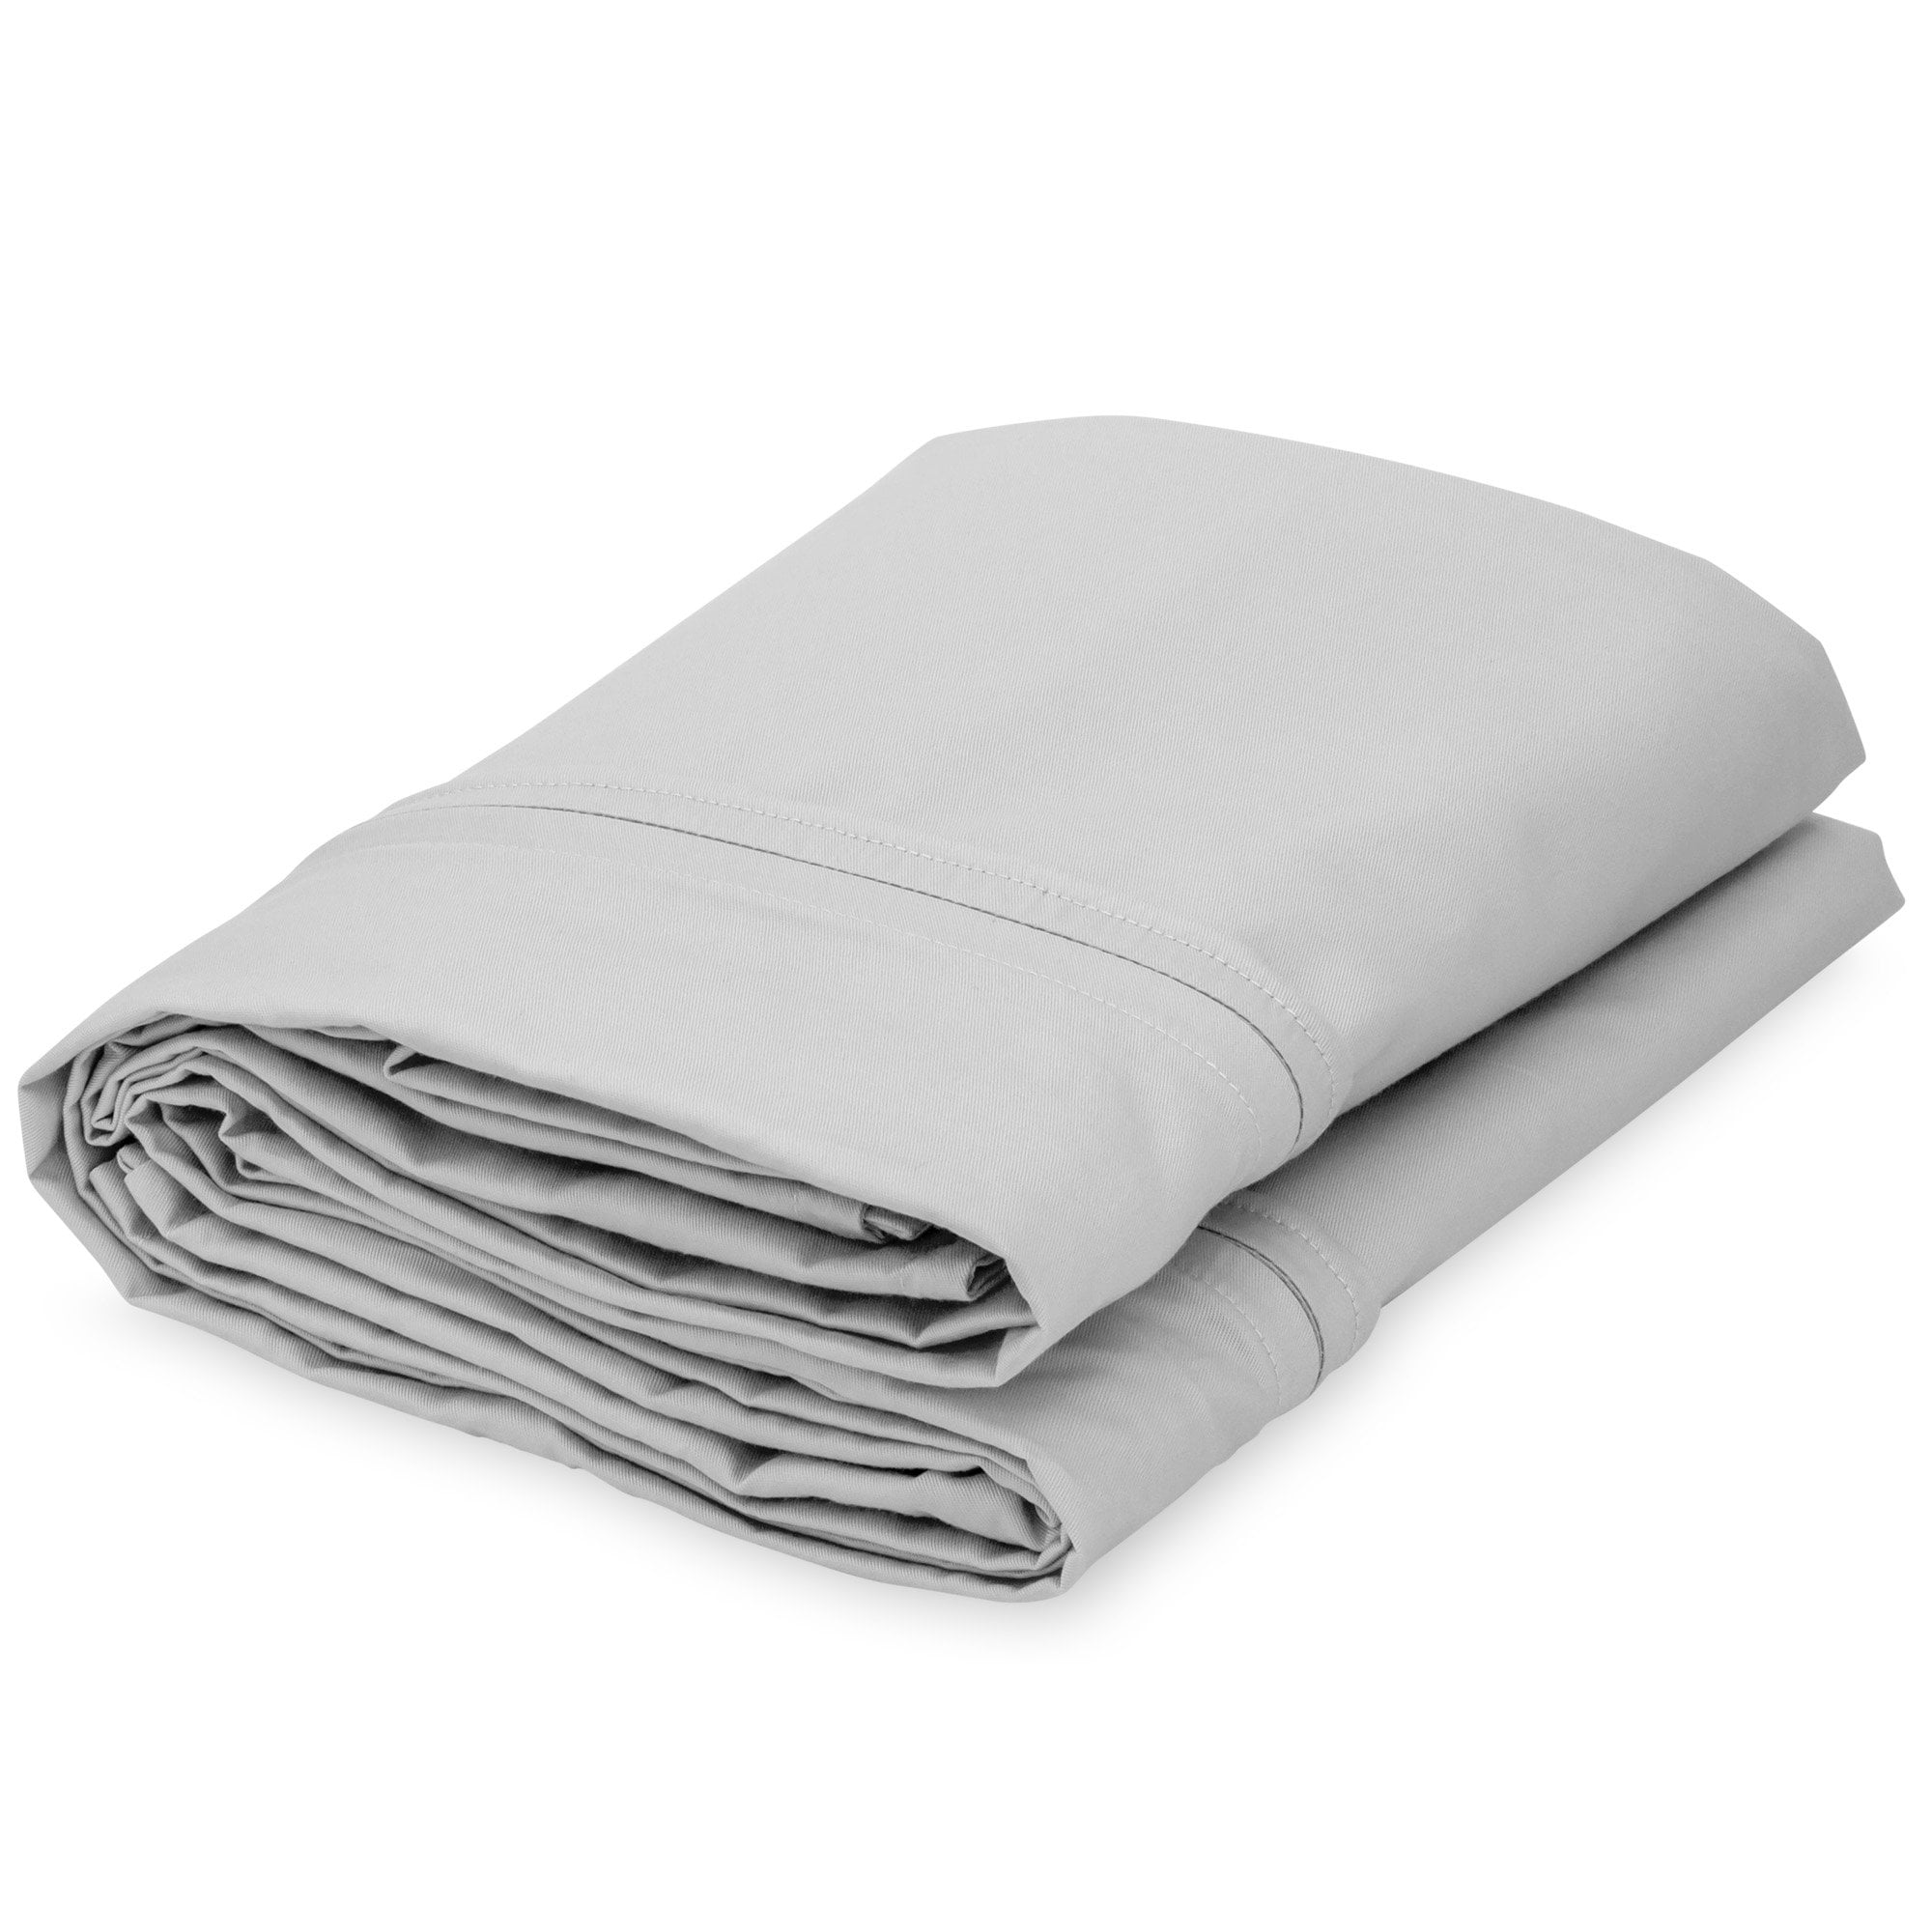 100% Organic Cotton Breathable with Quilted Pockets Dark Gray Blanket Twin Size Comforter 41” x 60” WeeSprout Weighted Blanket for Kids 10 lb for Children Weighing 90-120 lbs